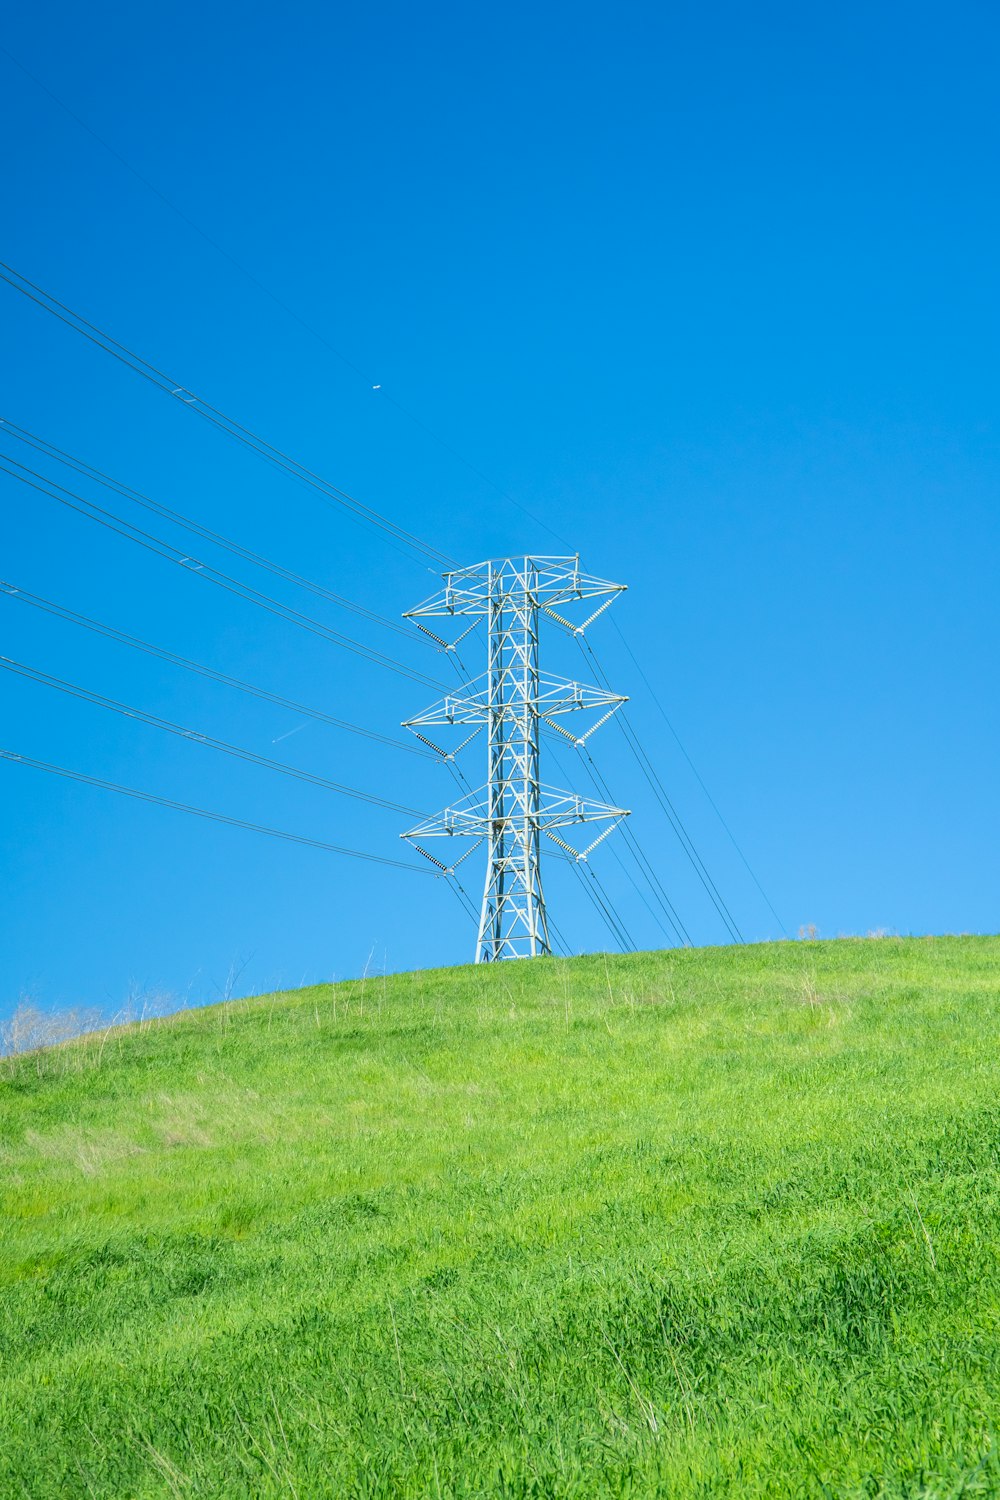 an electric pole on a grassy hill with a blue sky in the background